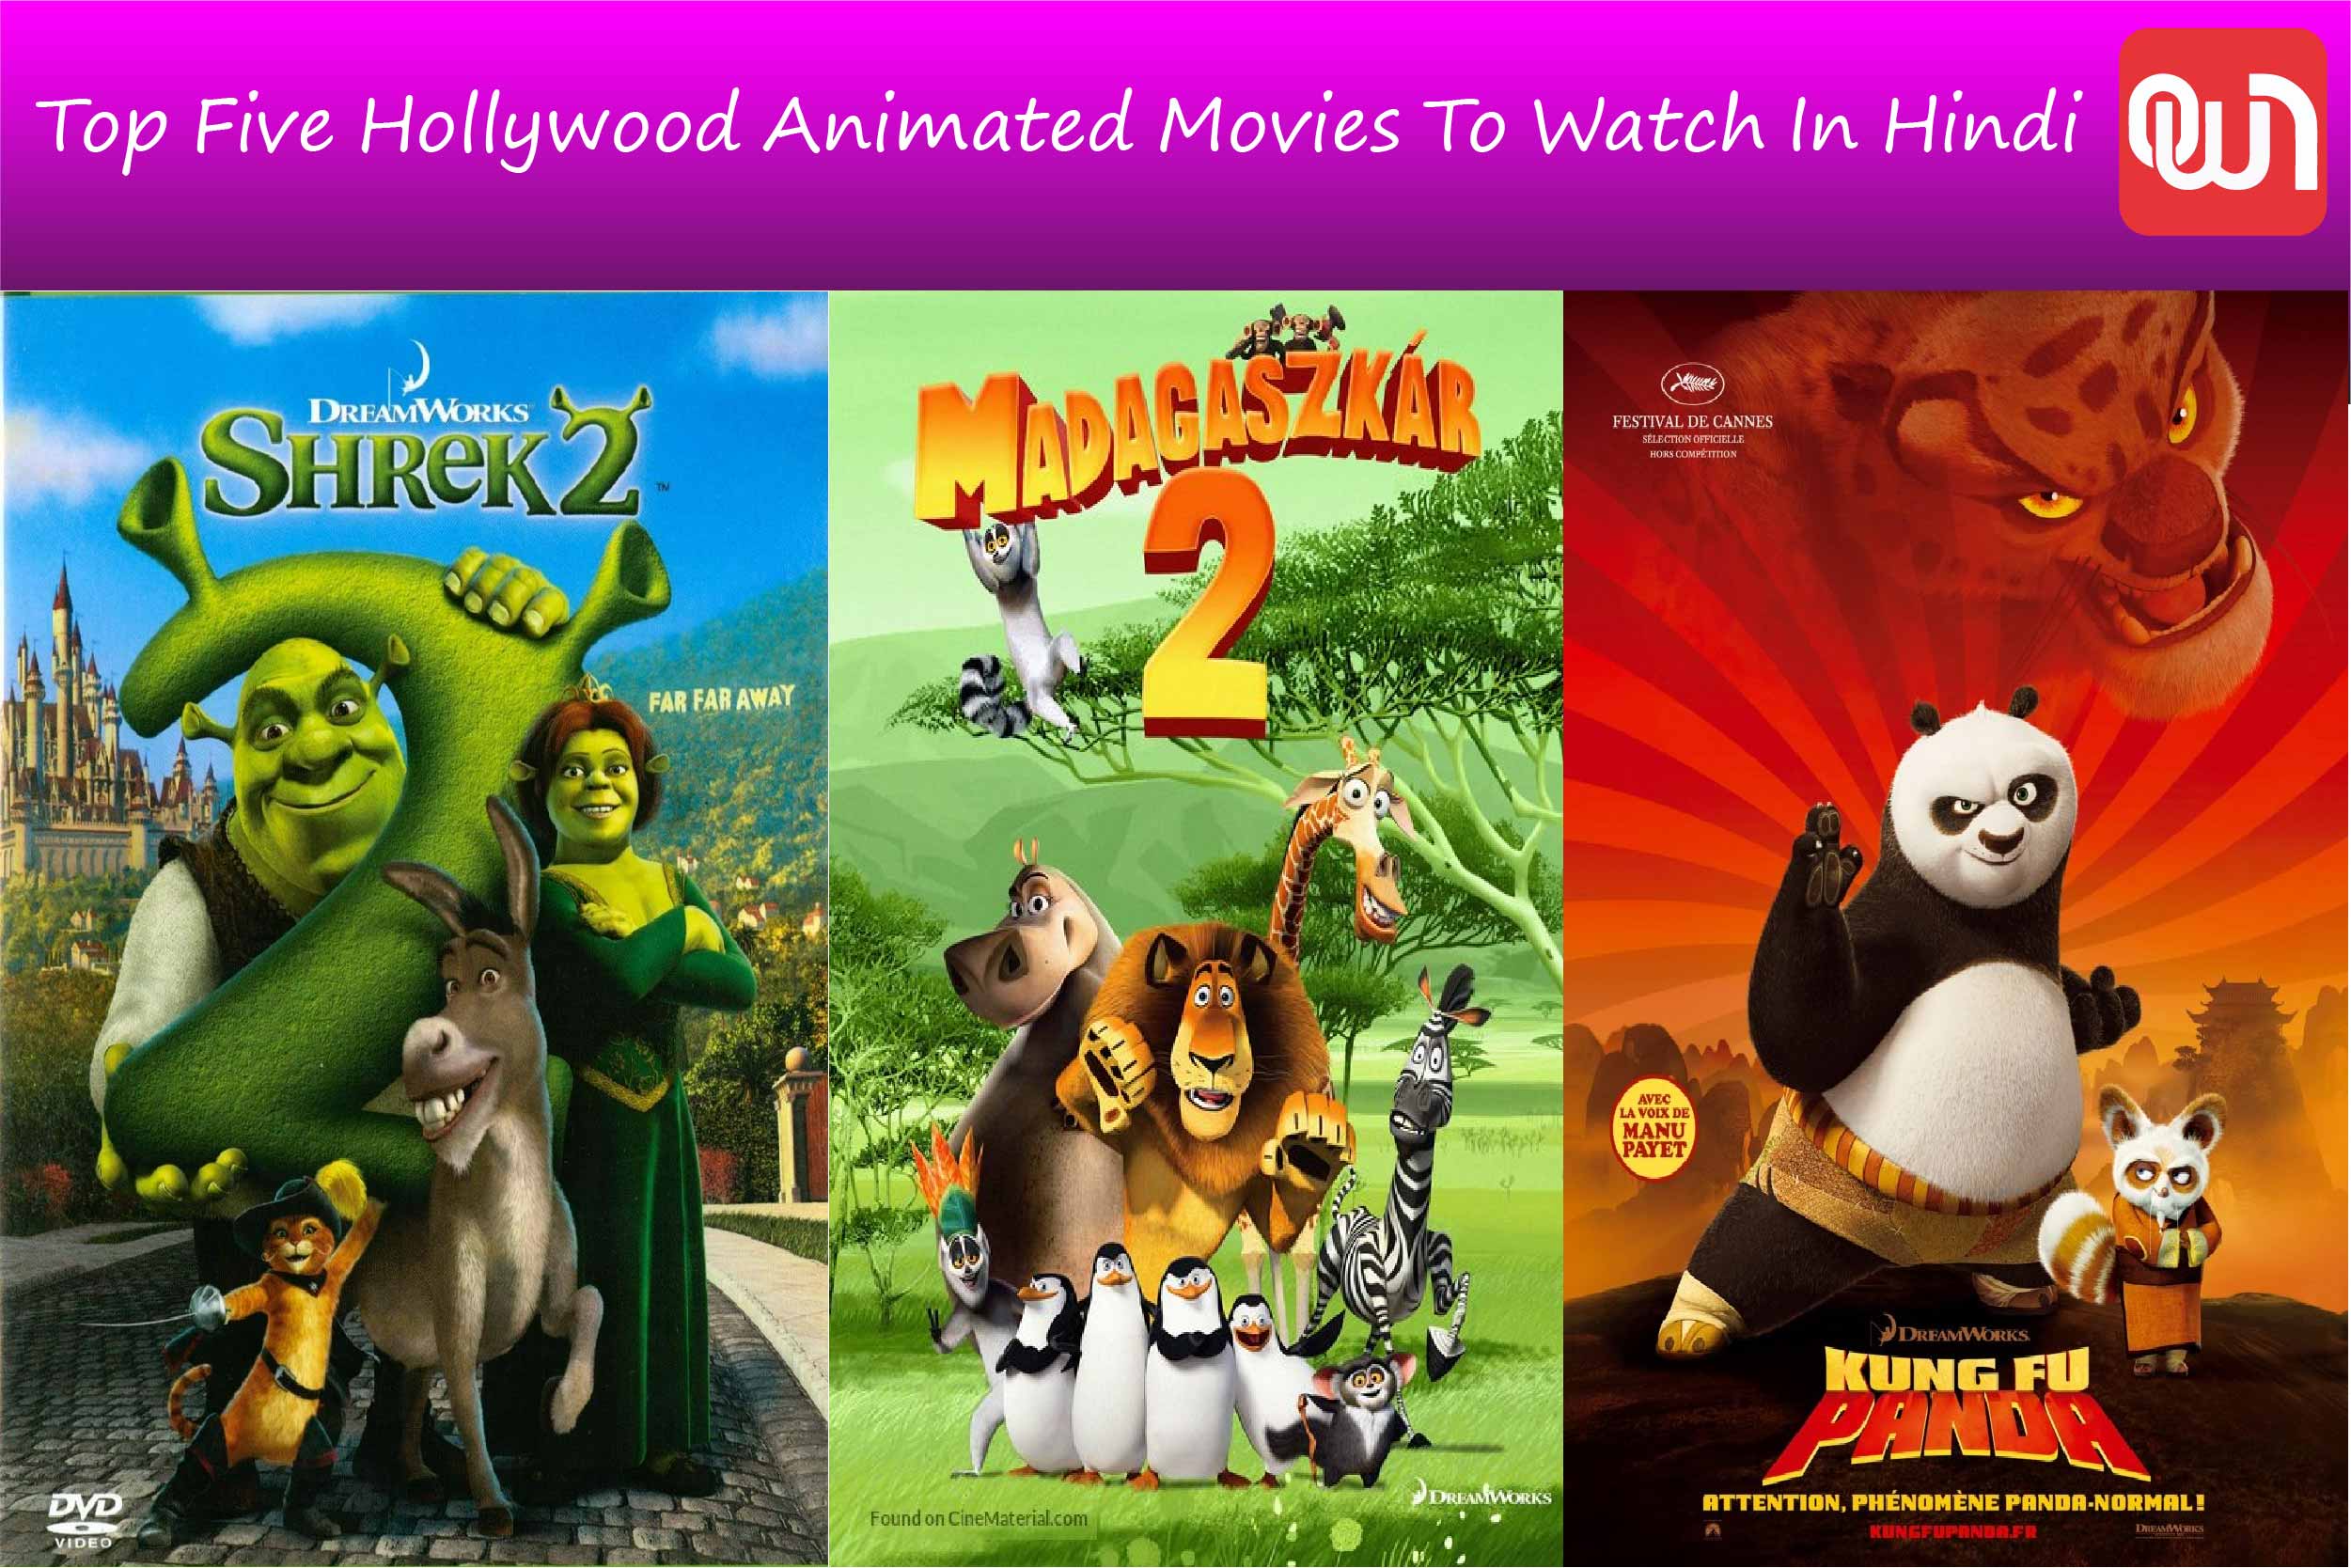 Top five Hollywood animated movies to watch in Hindi